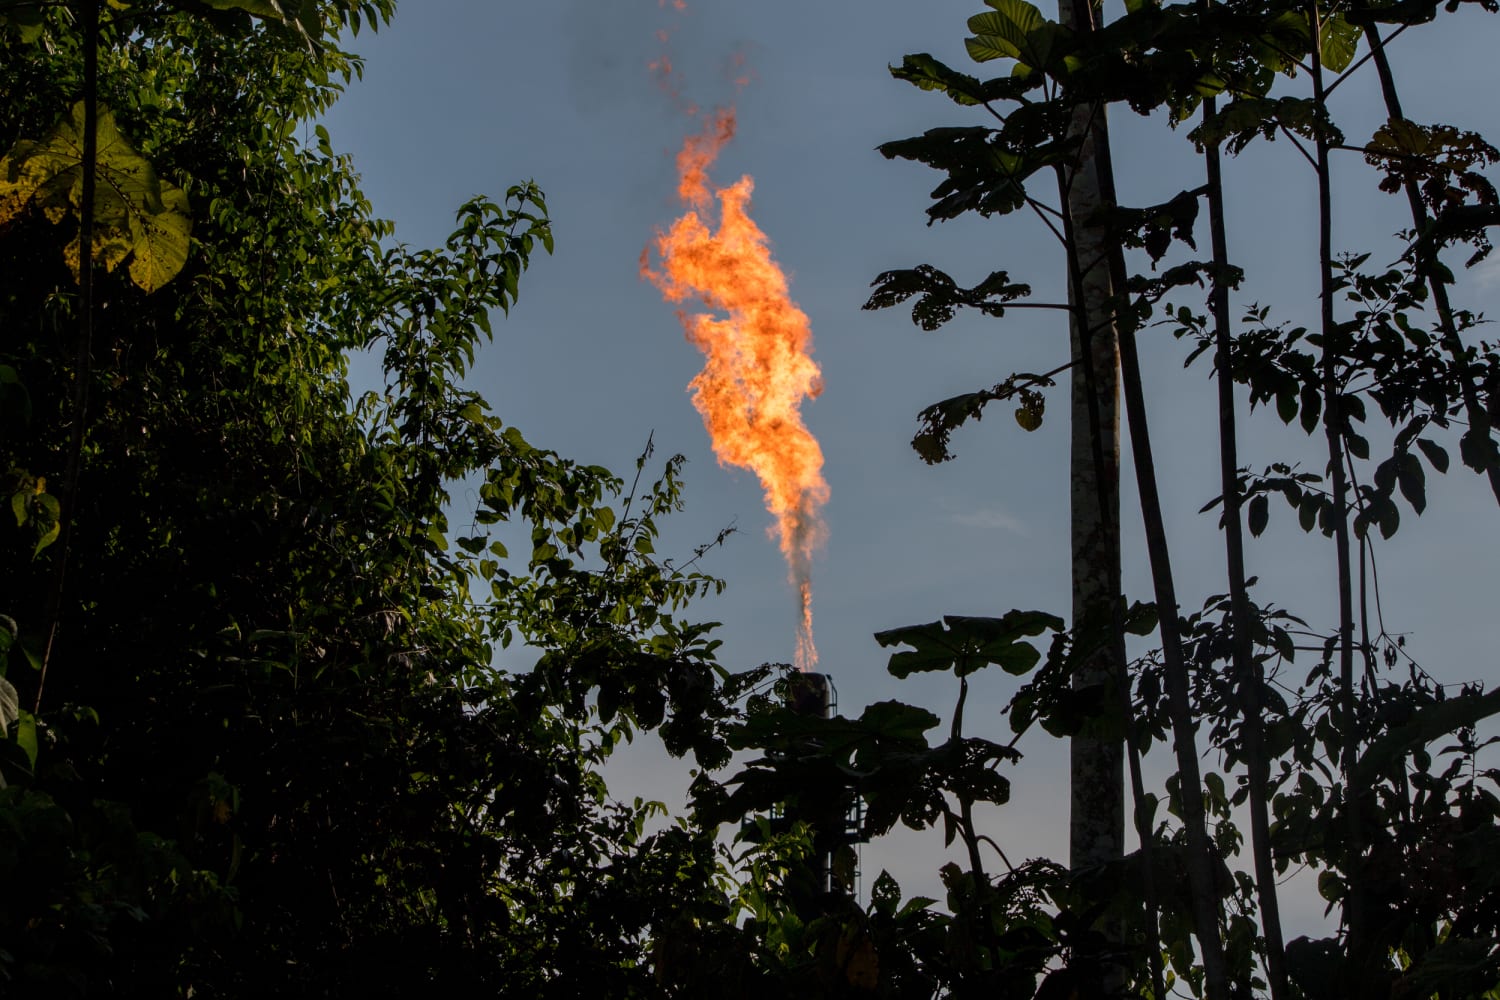 Crude reality: One U.S. state consumes half the oil from the Amazon rainforest